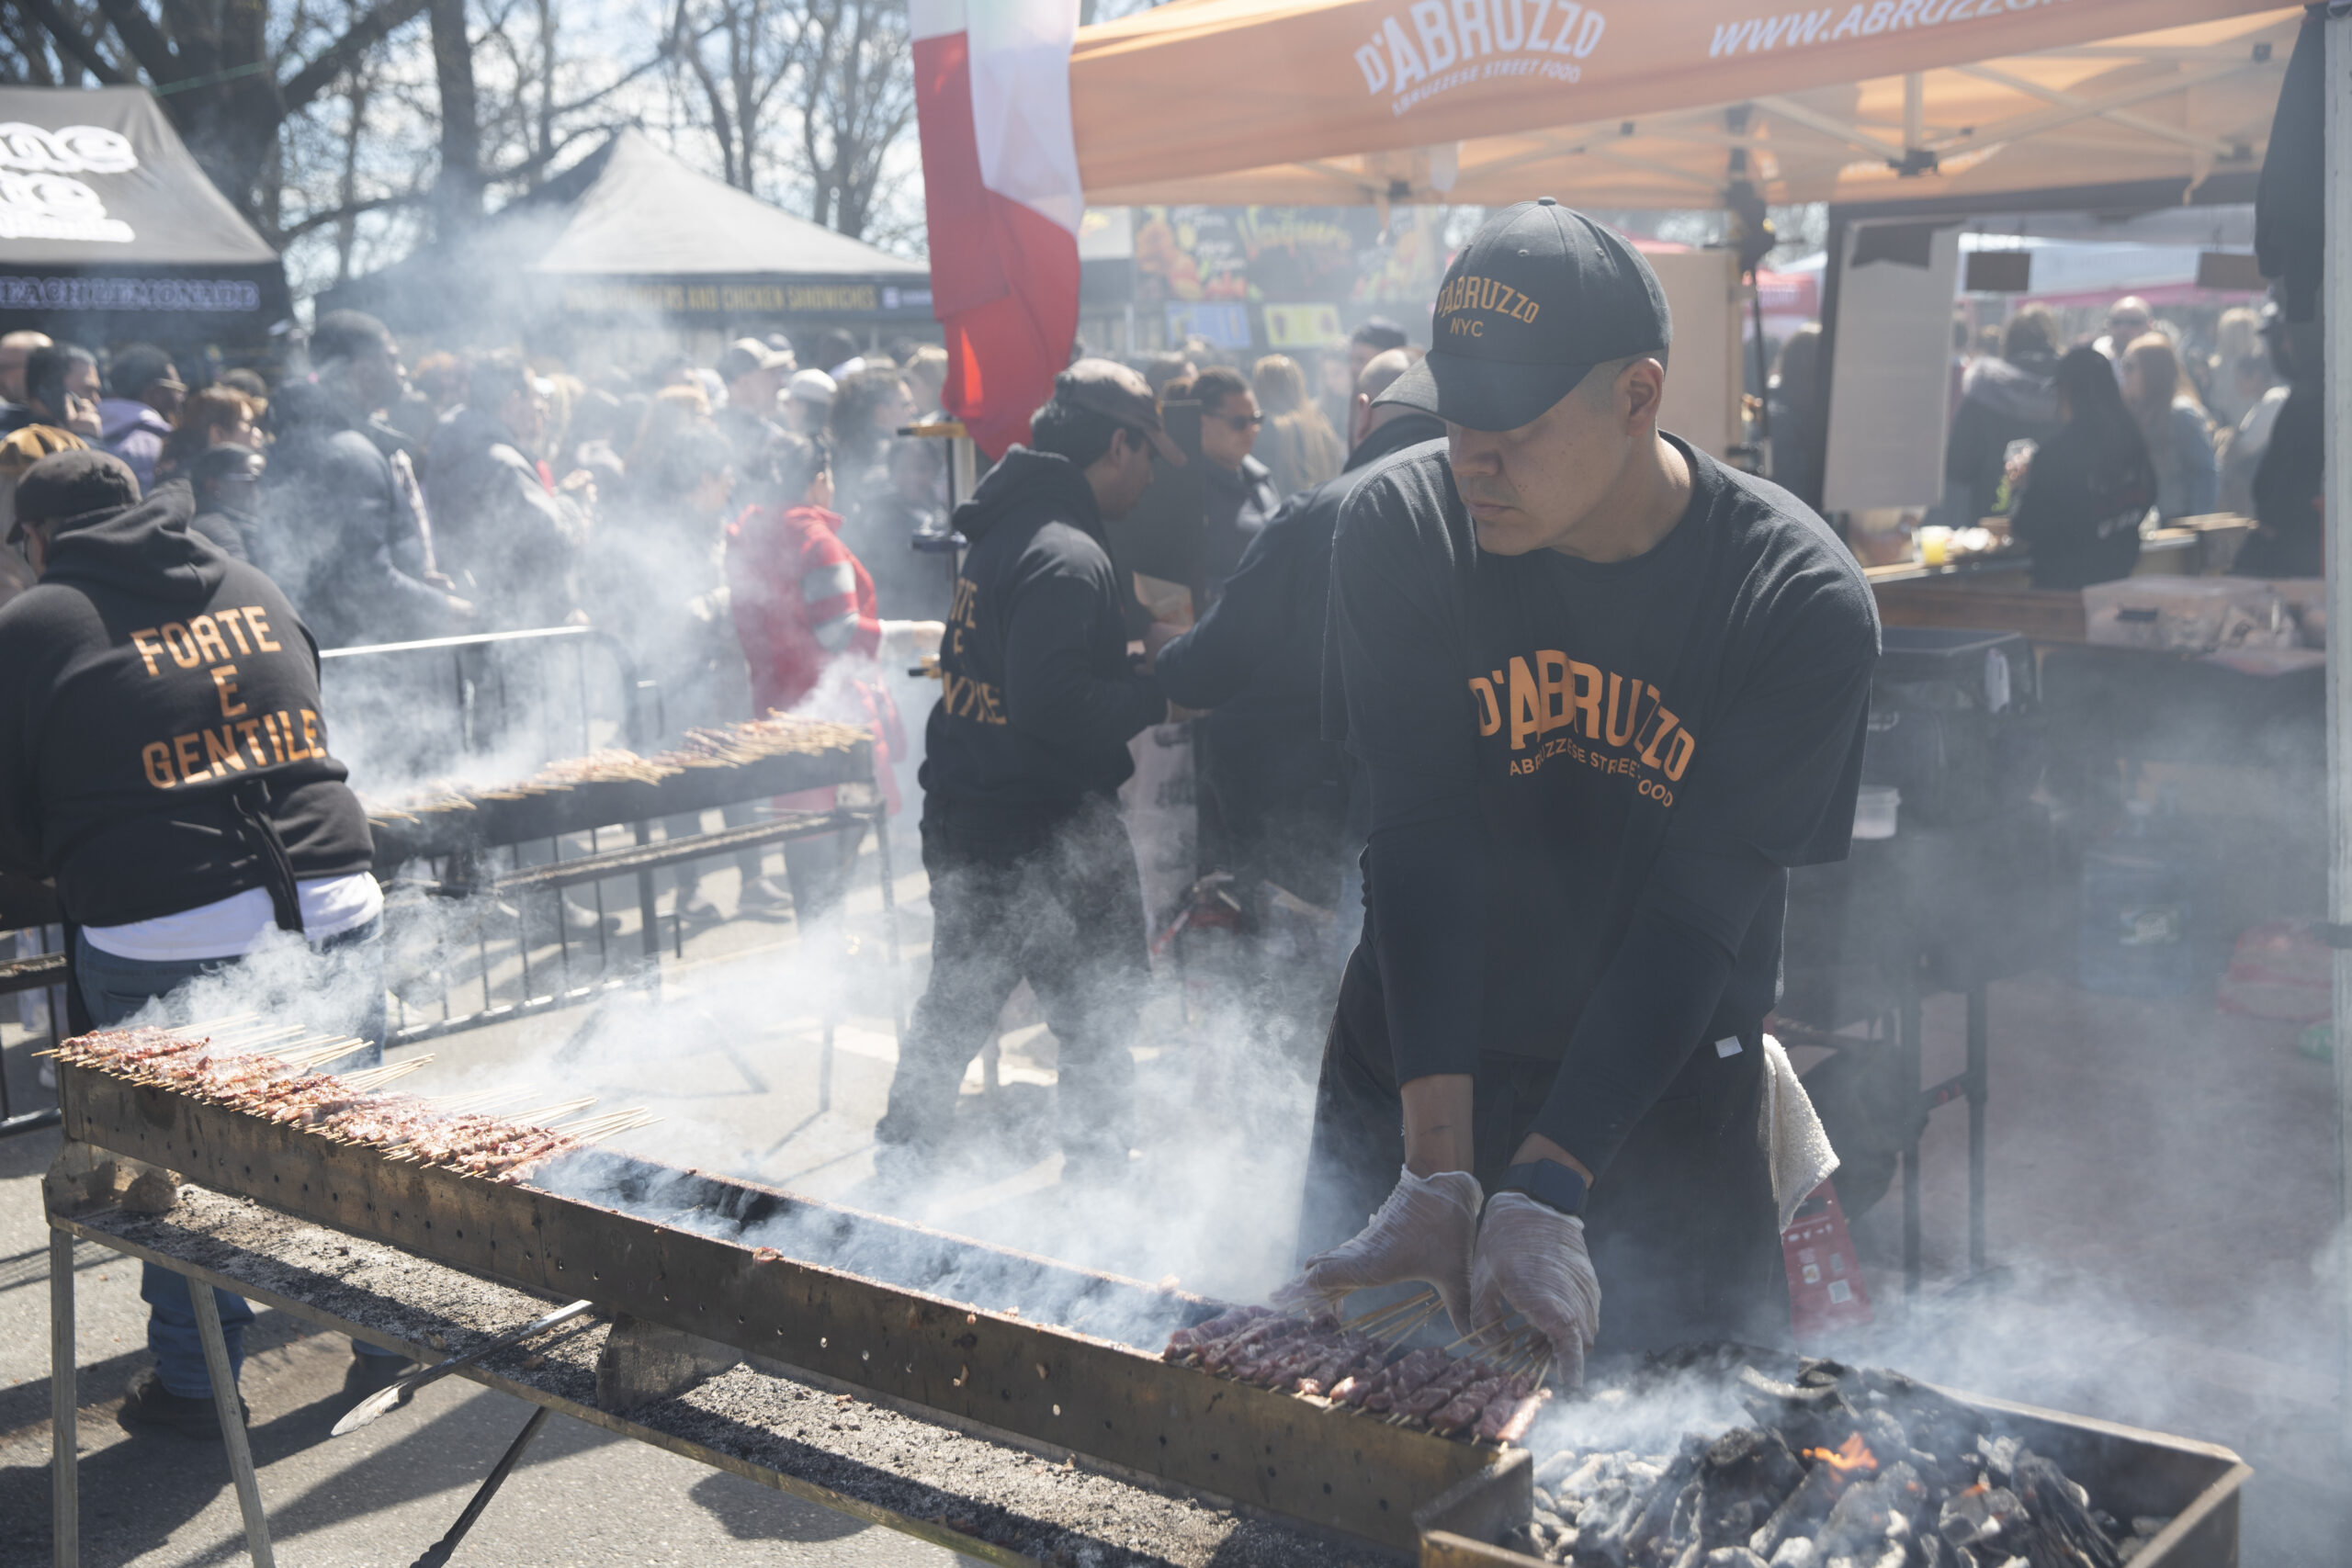 Meat is grilled at the D’Abruzzo stall at Prospect Park Smorgasburg.